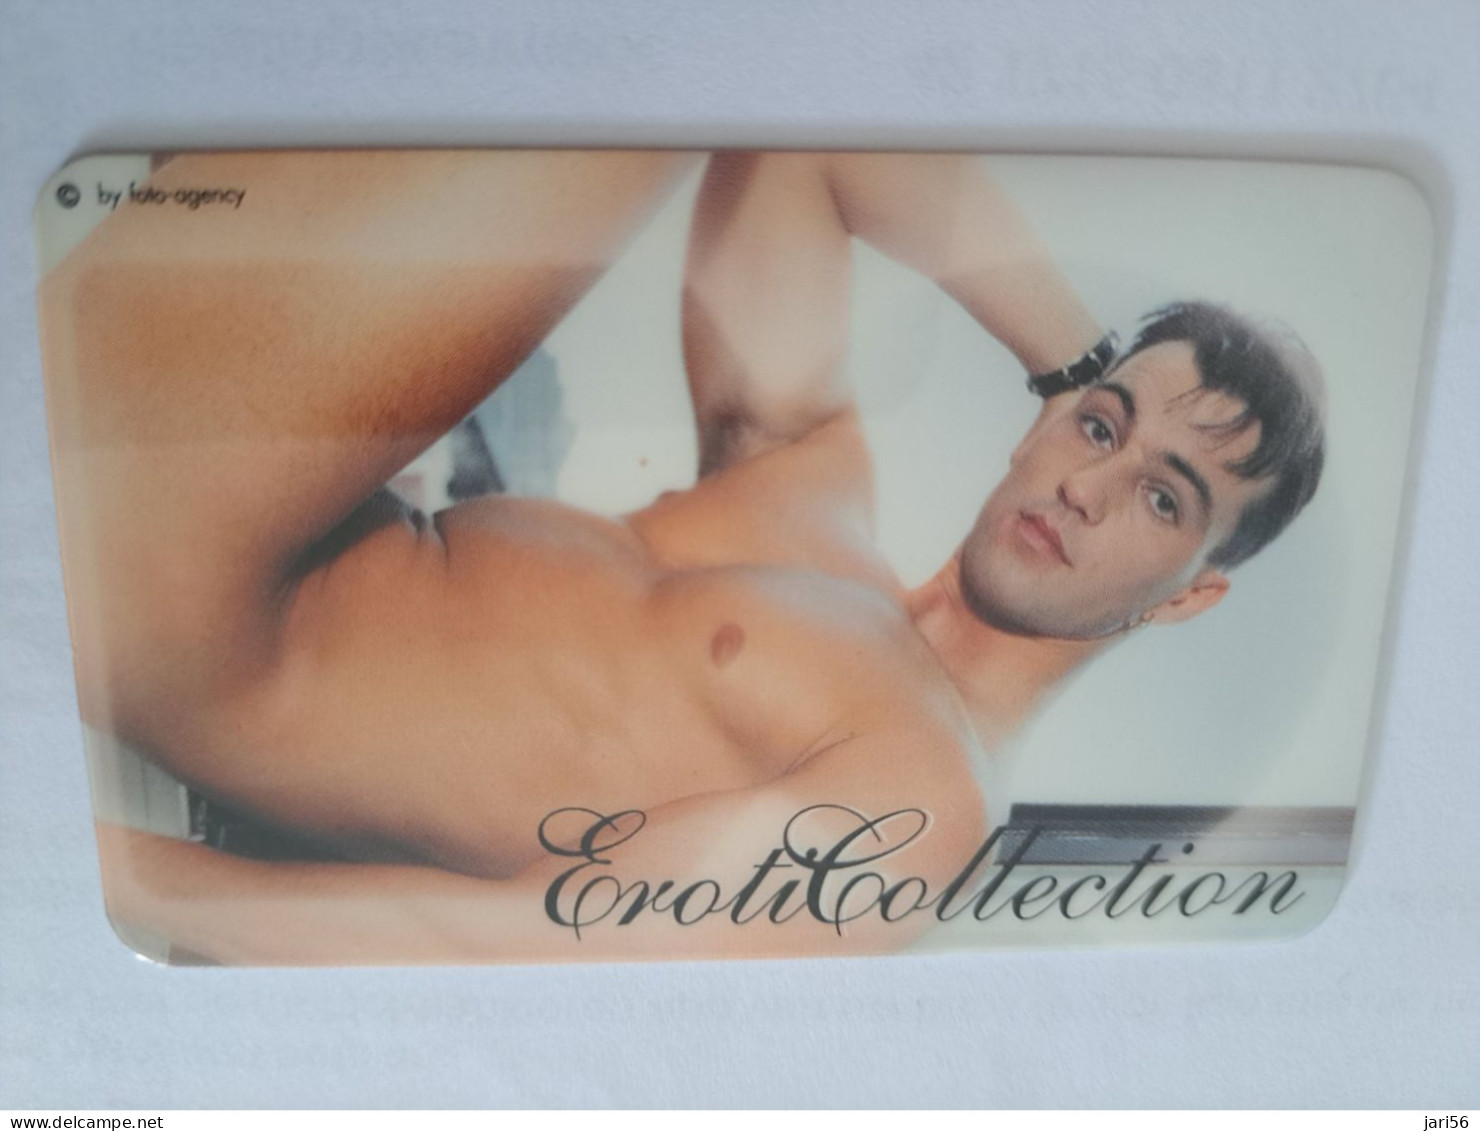 GREAT BRITAIN /20 UNITS / EROTIC COLLECTION / MODEL / NAKED MAN  / (date 09/00)  PREPAID CARD / MINT  **14305** - Collezioni